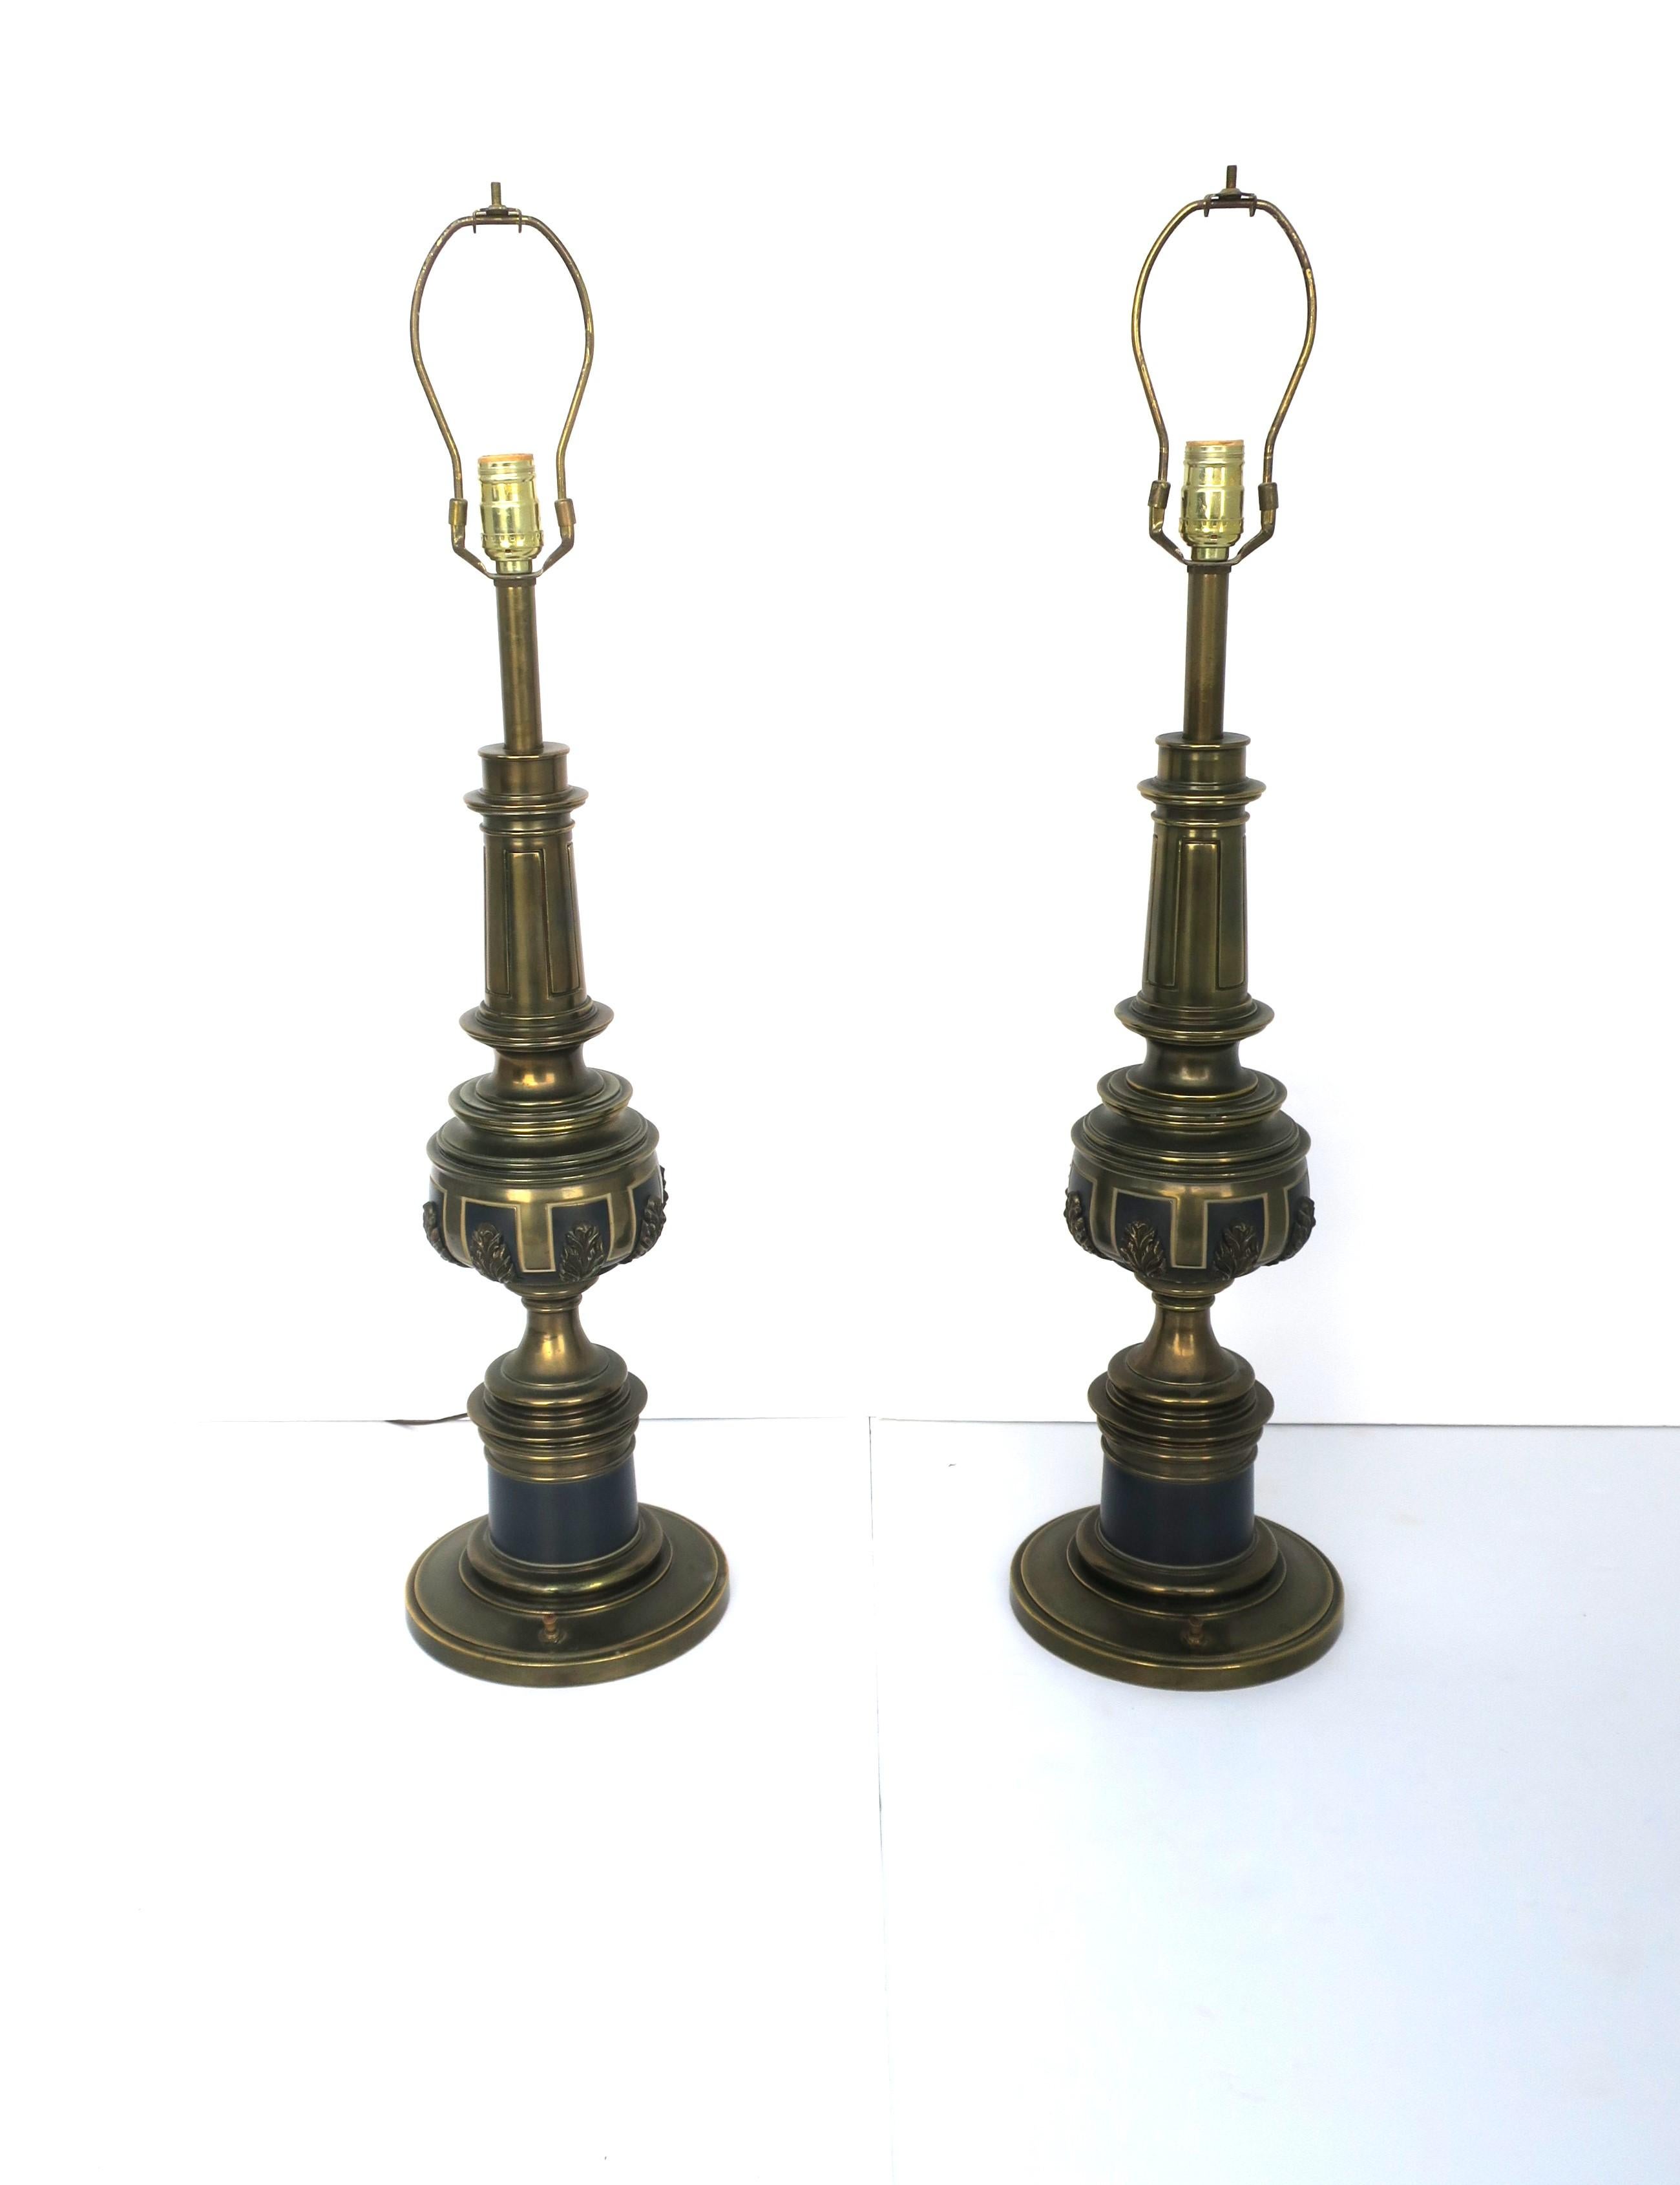 Hollywood Regency Brass and Black Enamel Table Lamps by Stiffle, Pair For Sale